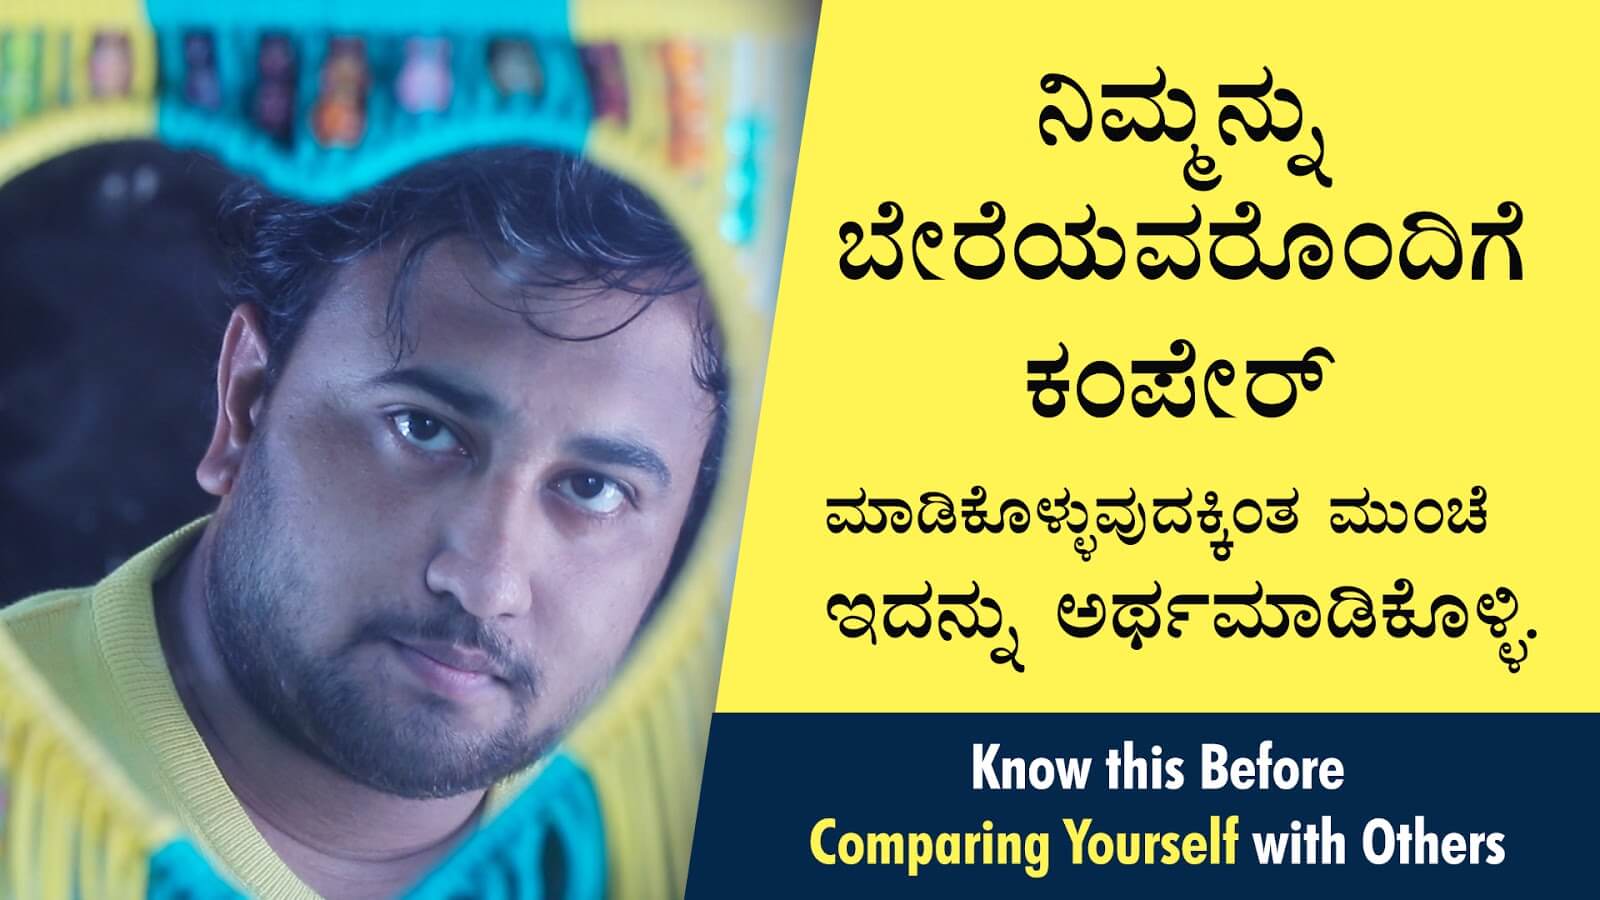 You are currently viewing ನಿಮ್ಮನ್ನು ಬೇರೆಯವರೊಂದಿಗೆ ಕಂಪೇರ್ ಮಾಡಿಕೊಳ್ಳುವುದಕ್ಕಿಂತ ಮುಂಚೆ ಇದನ್ನು ಅರ್ಥಮಾಡಿಕೊಳ್ಳಿ – Know this before comparing yourself with others in Kannada